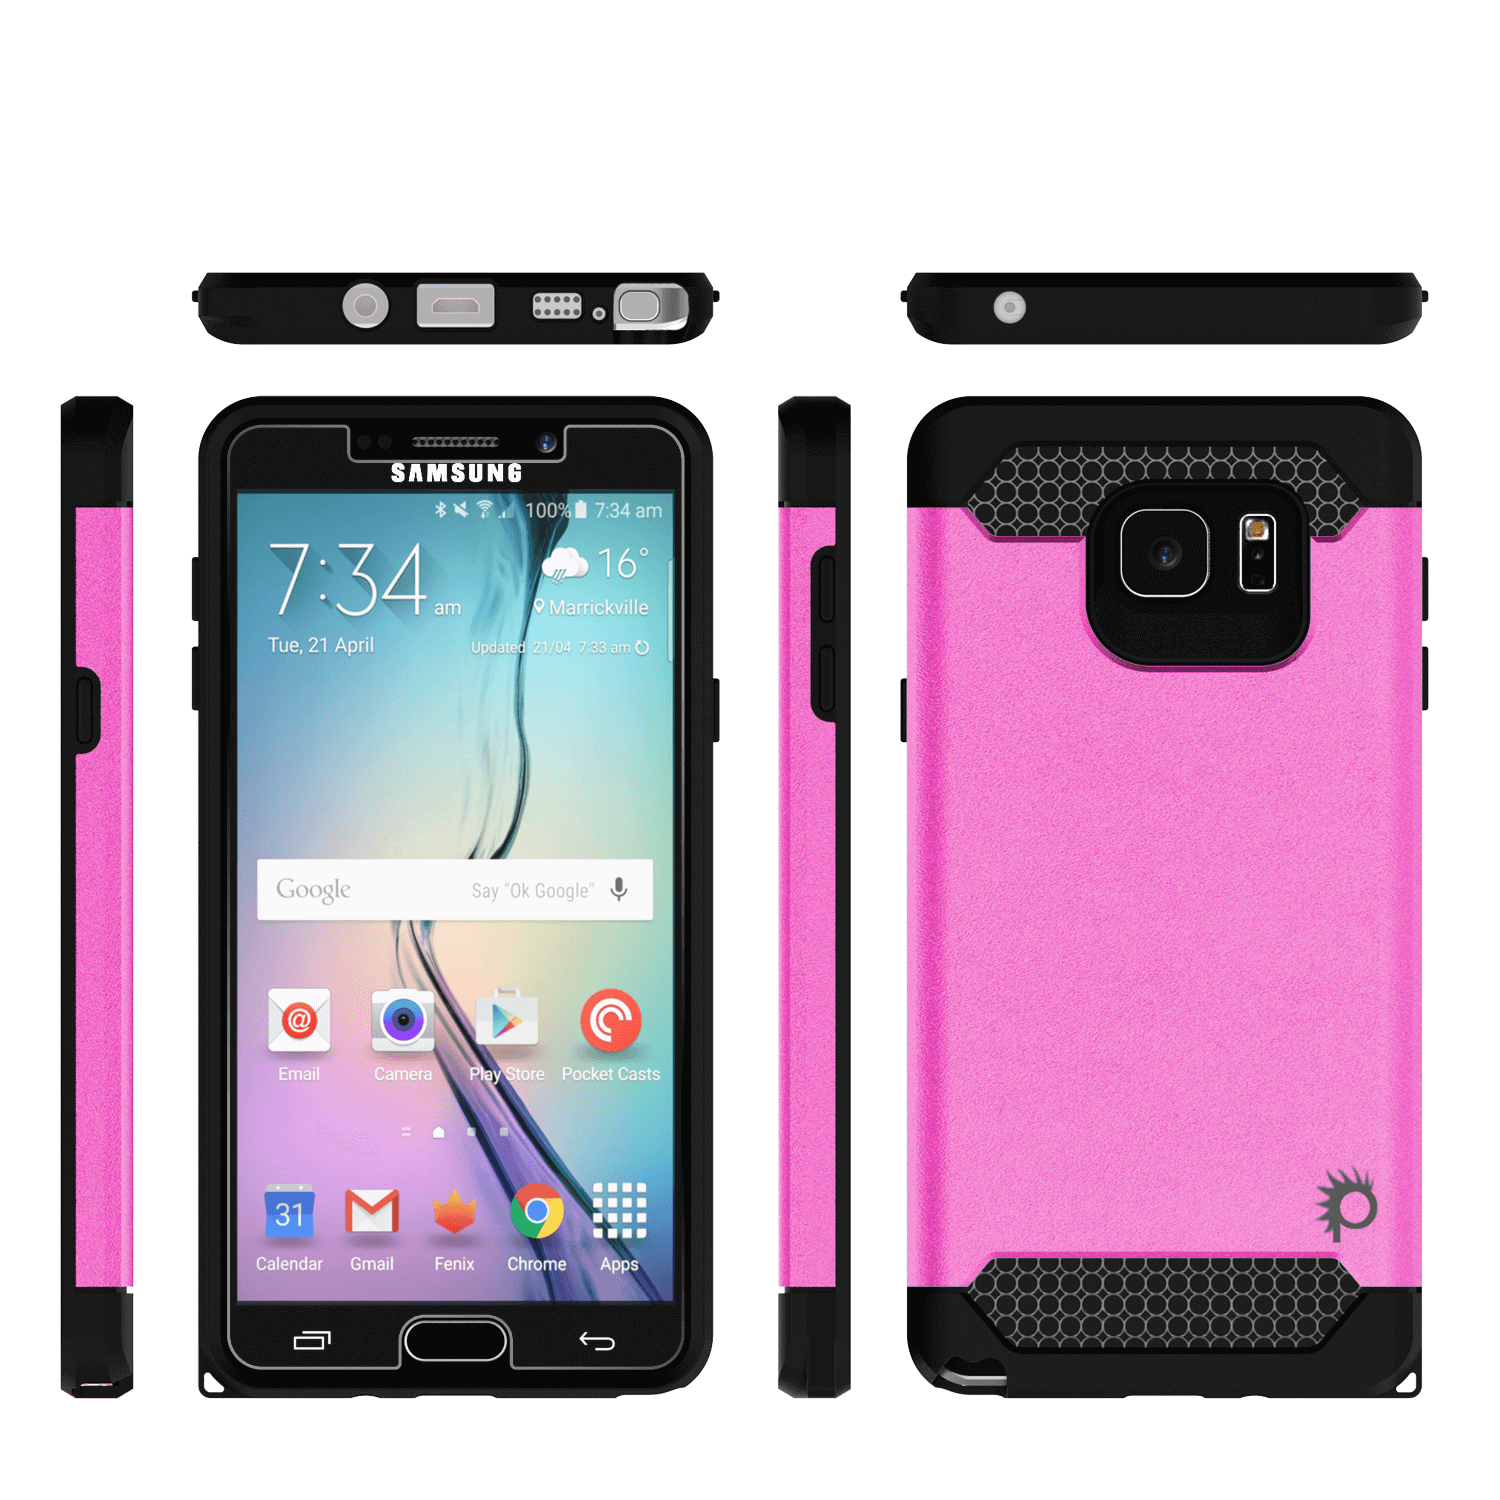 Galaxy Note 5 Case PunkCase Galactic Pink Series Slim Armor Soft Cover Case w/ Tempered Glass - PunkCase NZ